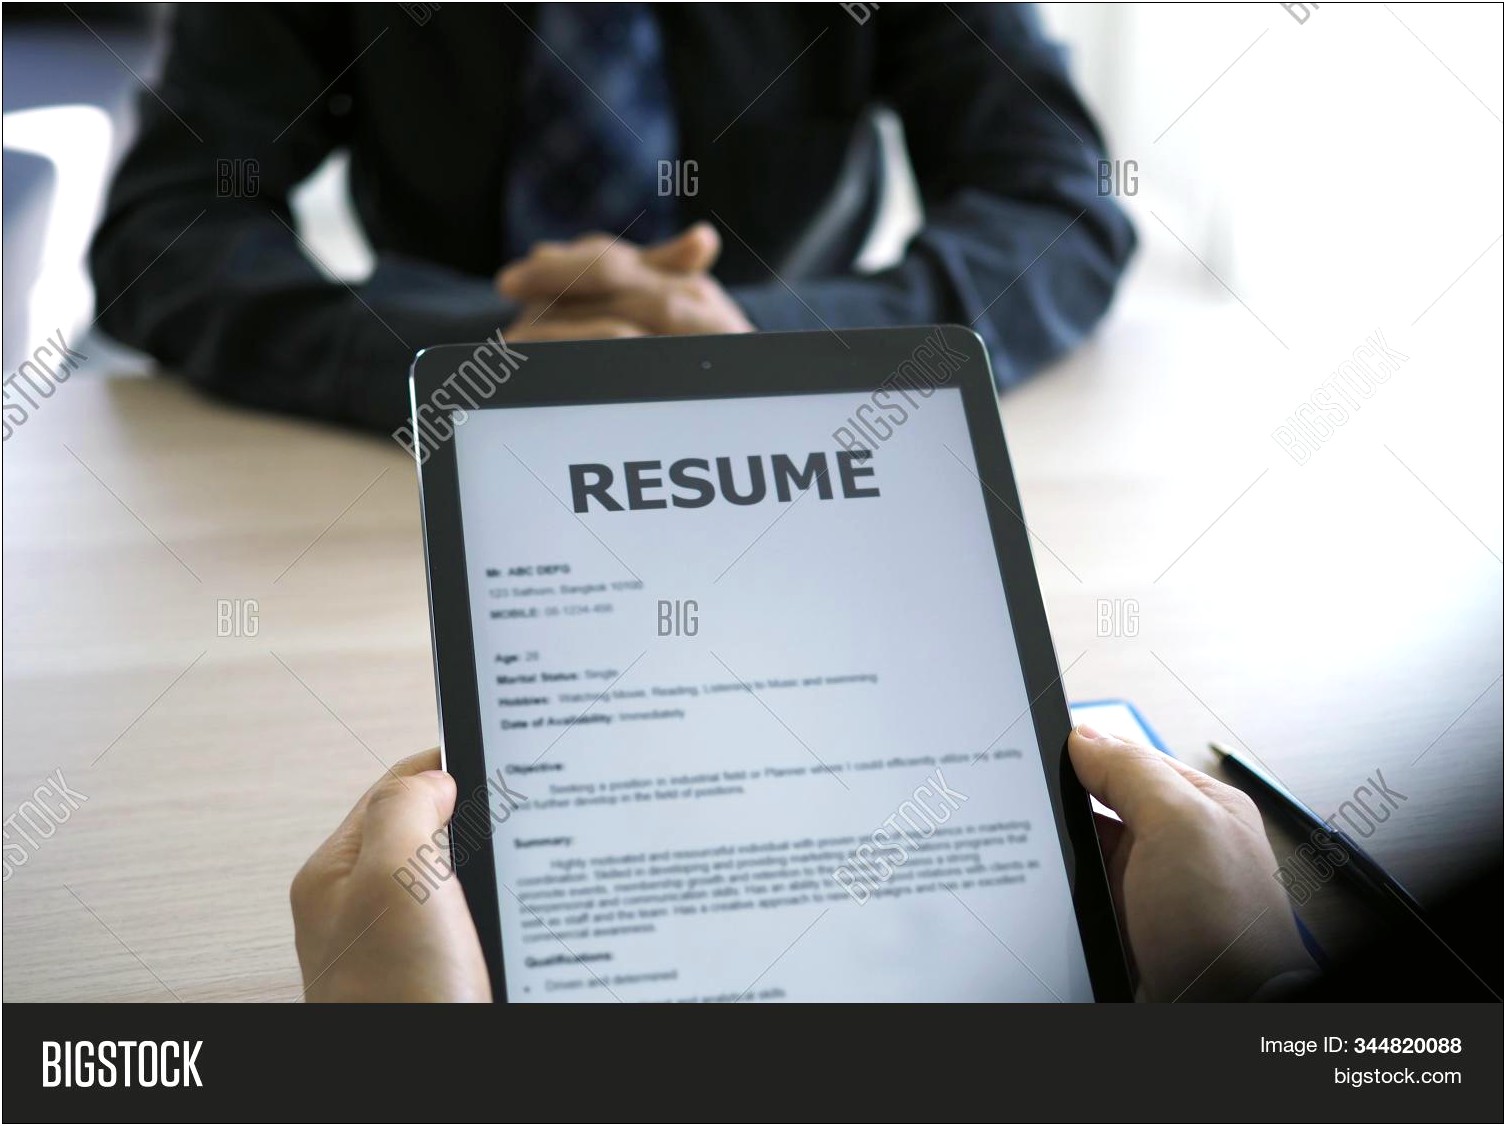 Interviewing Skills On A Resume